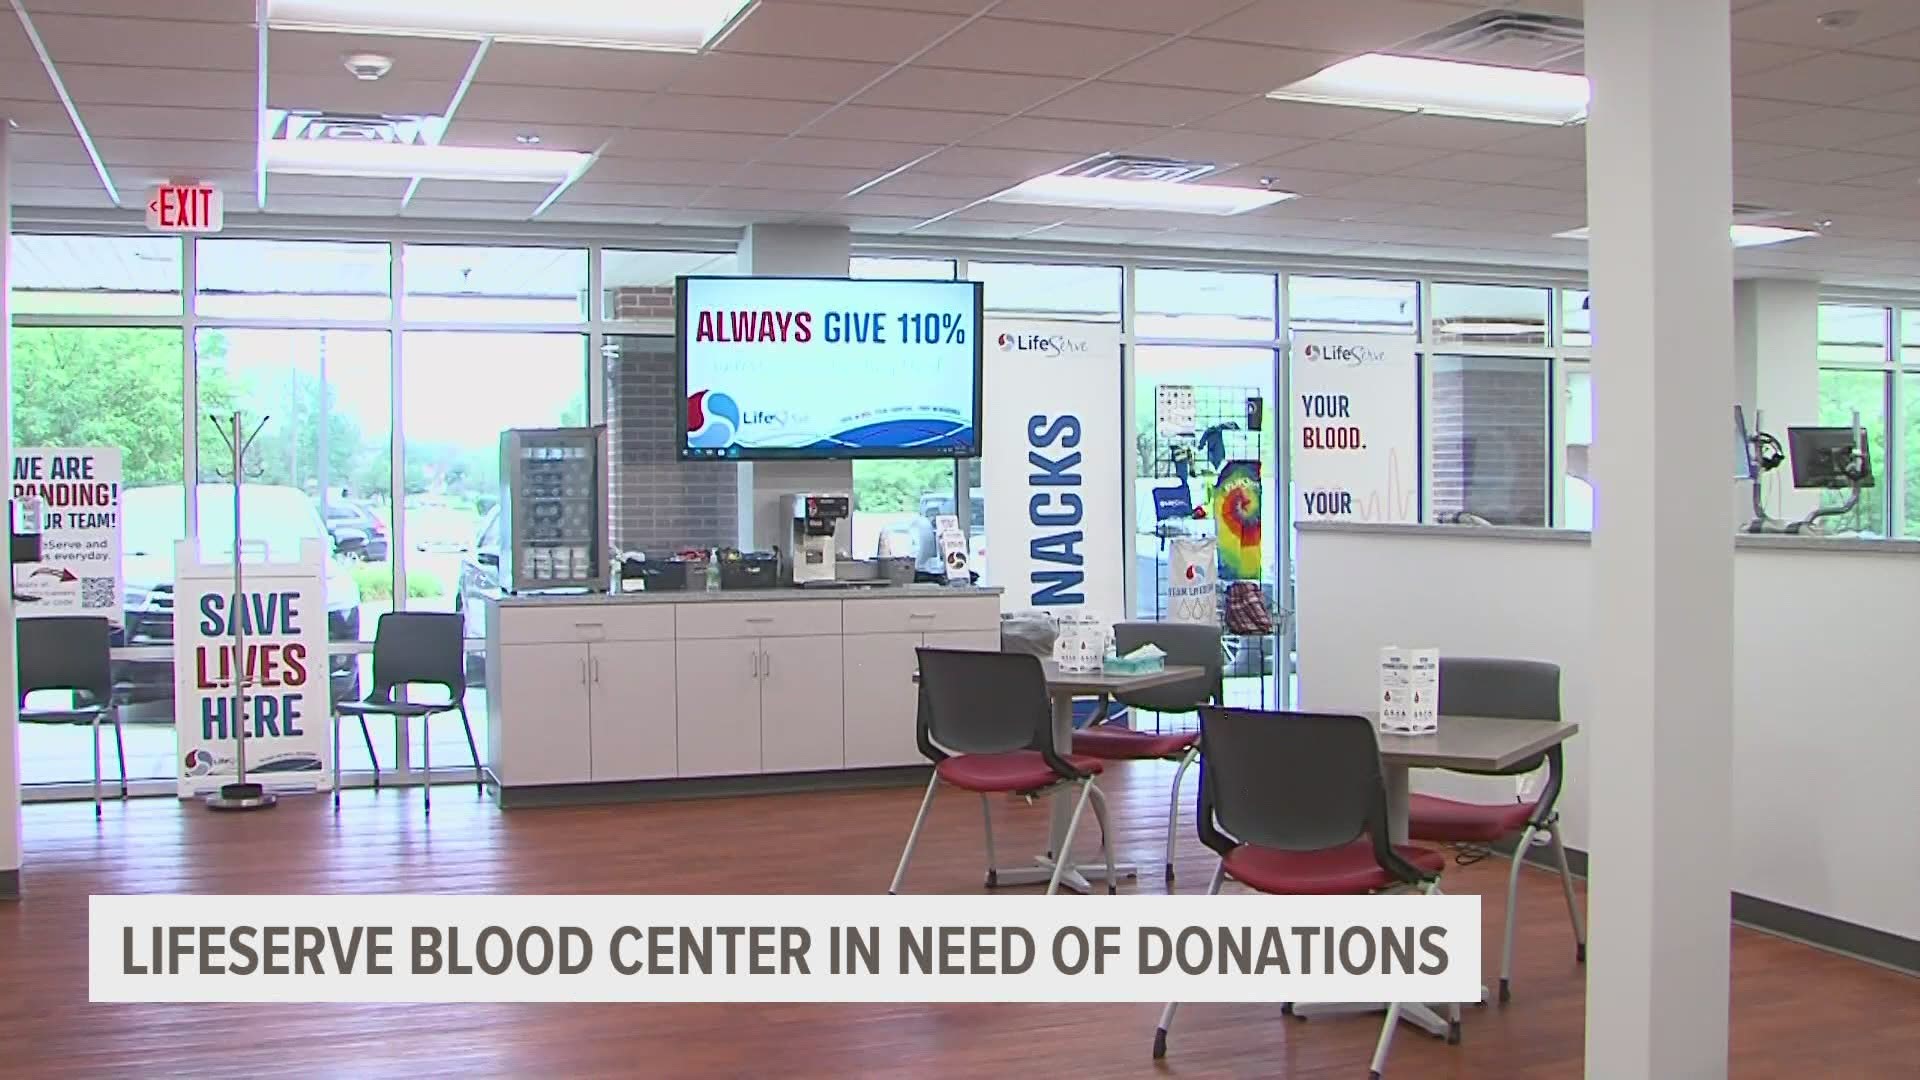 "We're really hoping that donors can come find us here while we're hiring and training new team members to be able to go out and do mobile blood drives again."